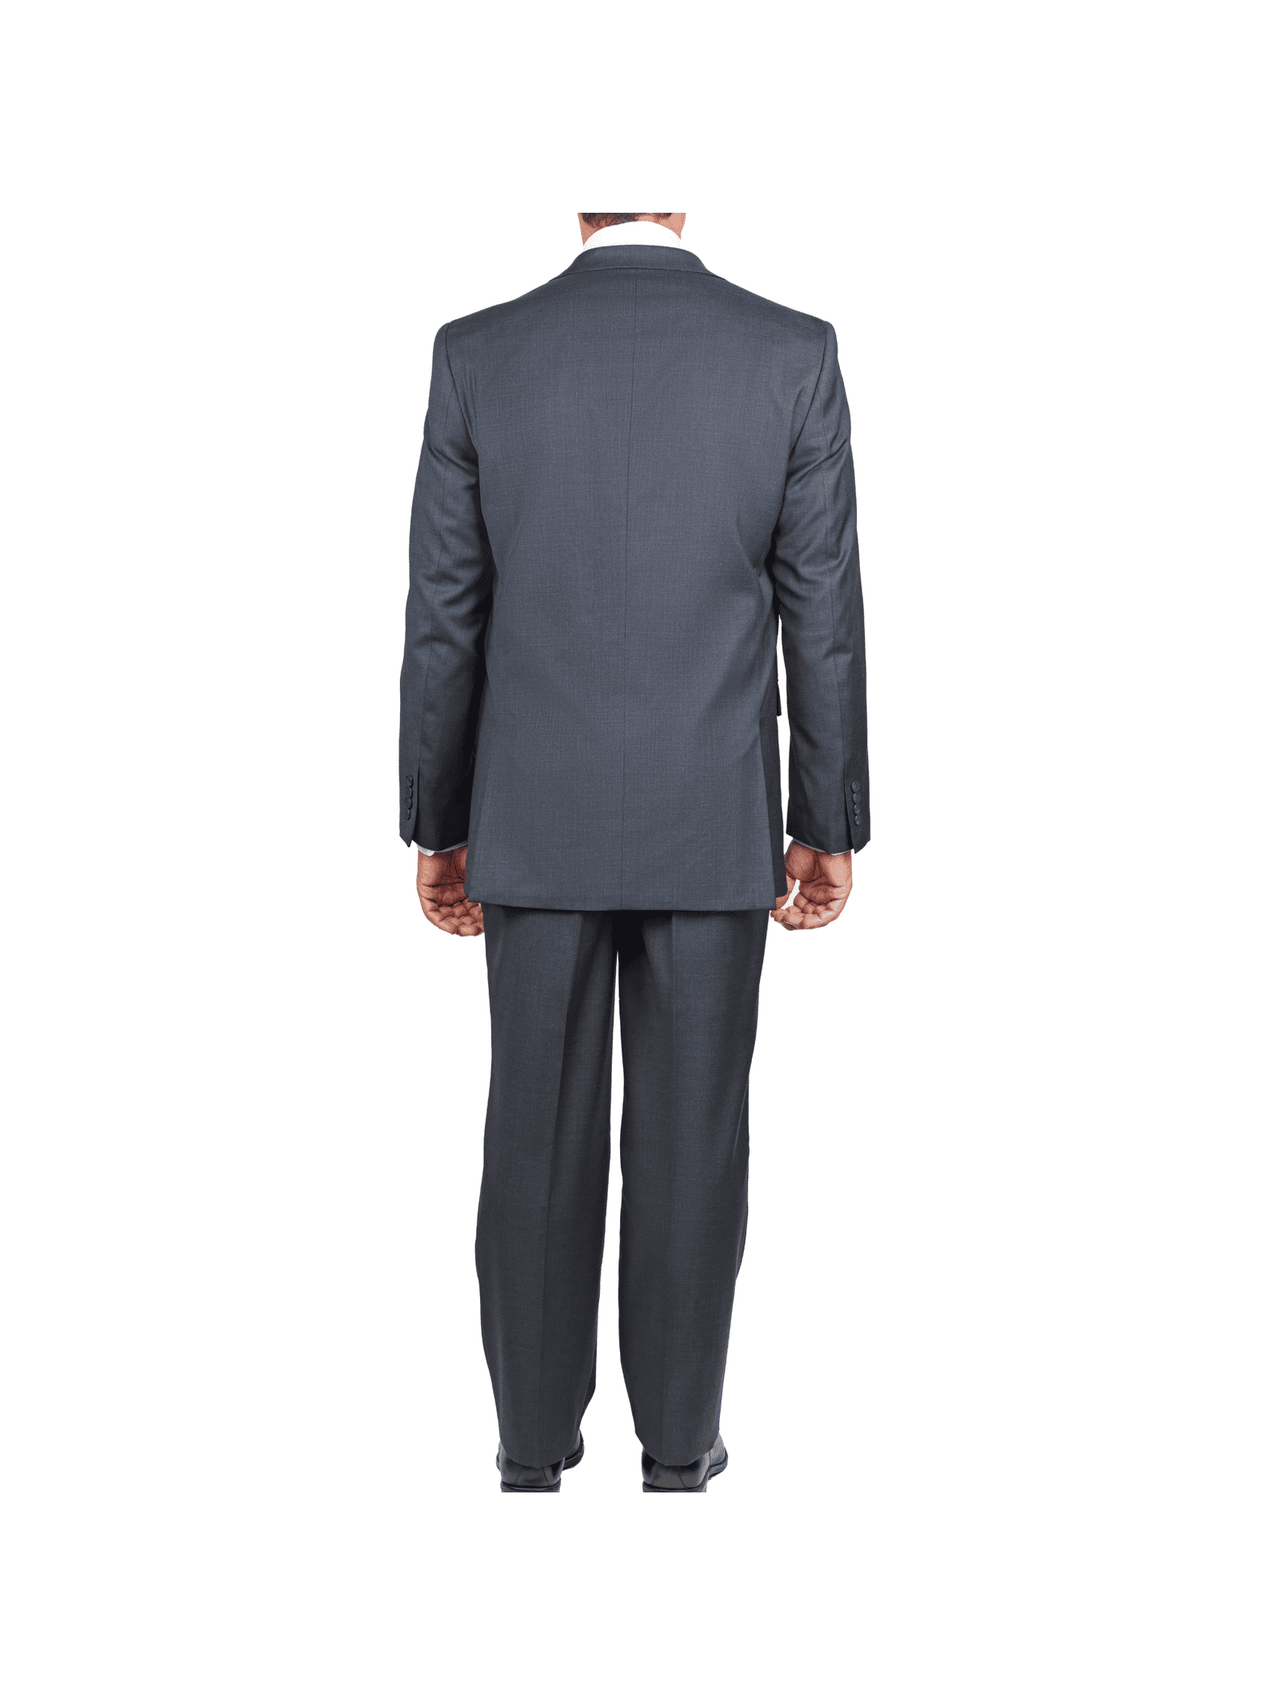 back view of charcoal gray wool men's suit